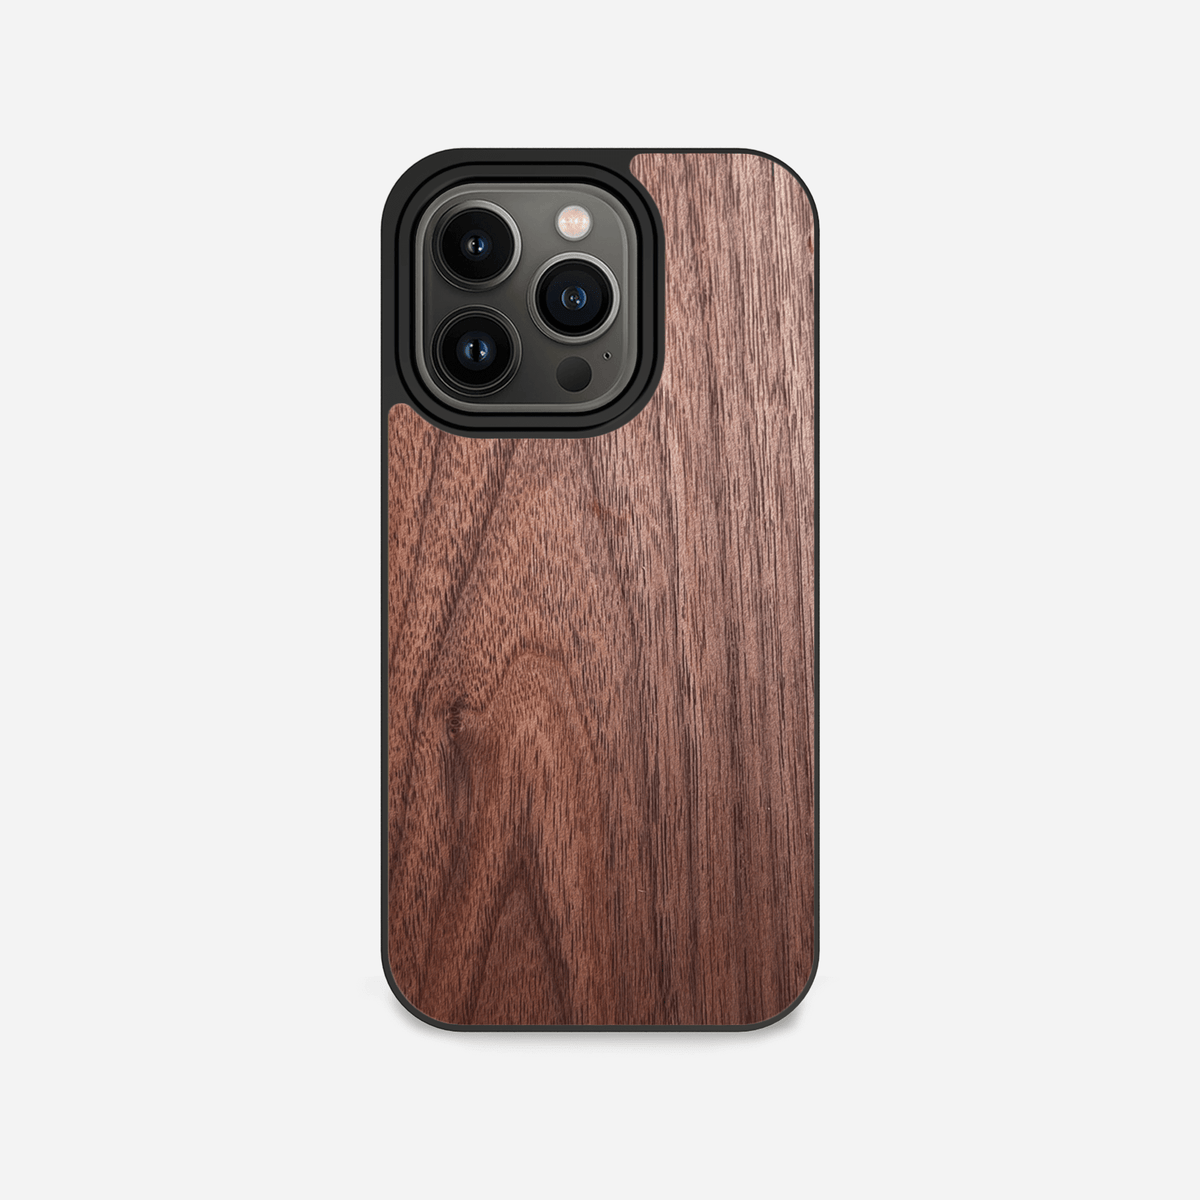 Leather and Wood iPhone Case, Keyway, Handcrafted iPhone 12 Pro Max Cases